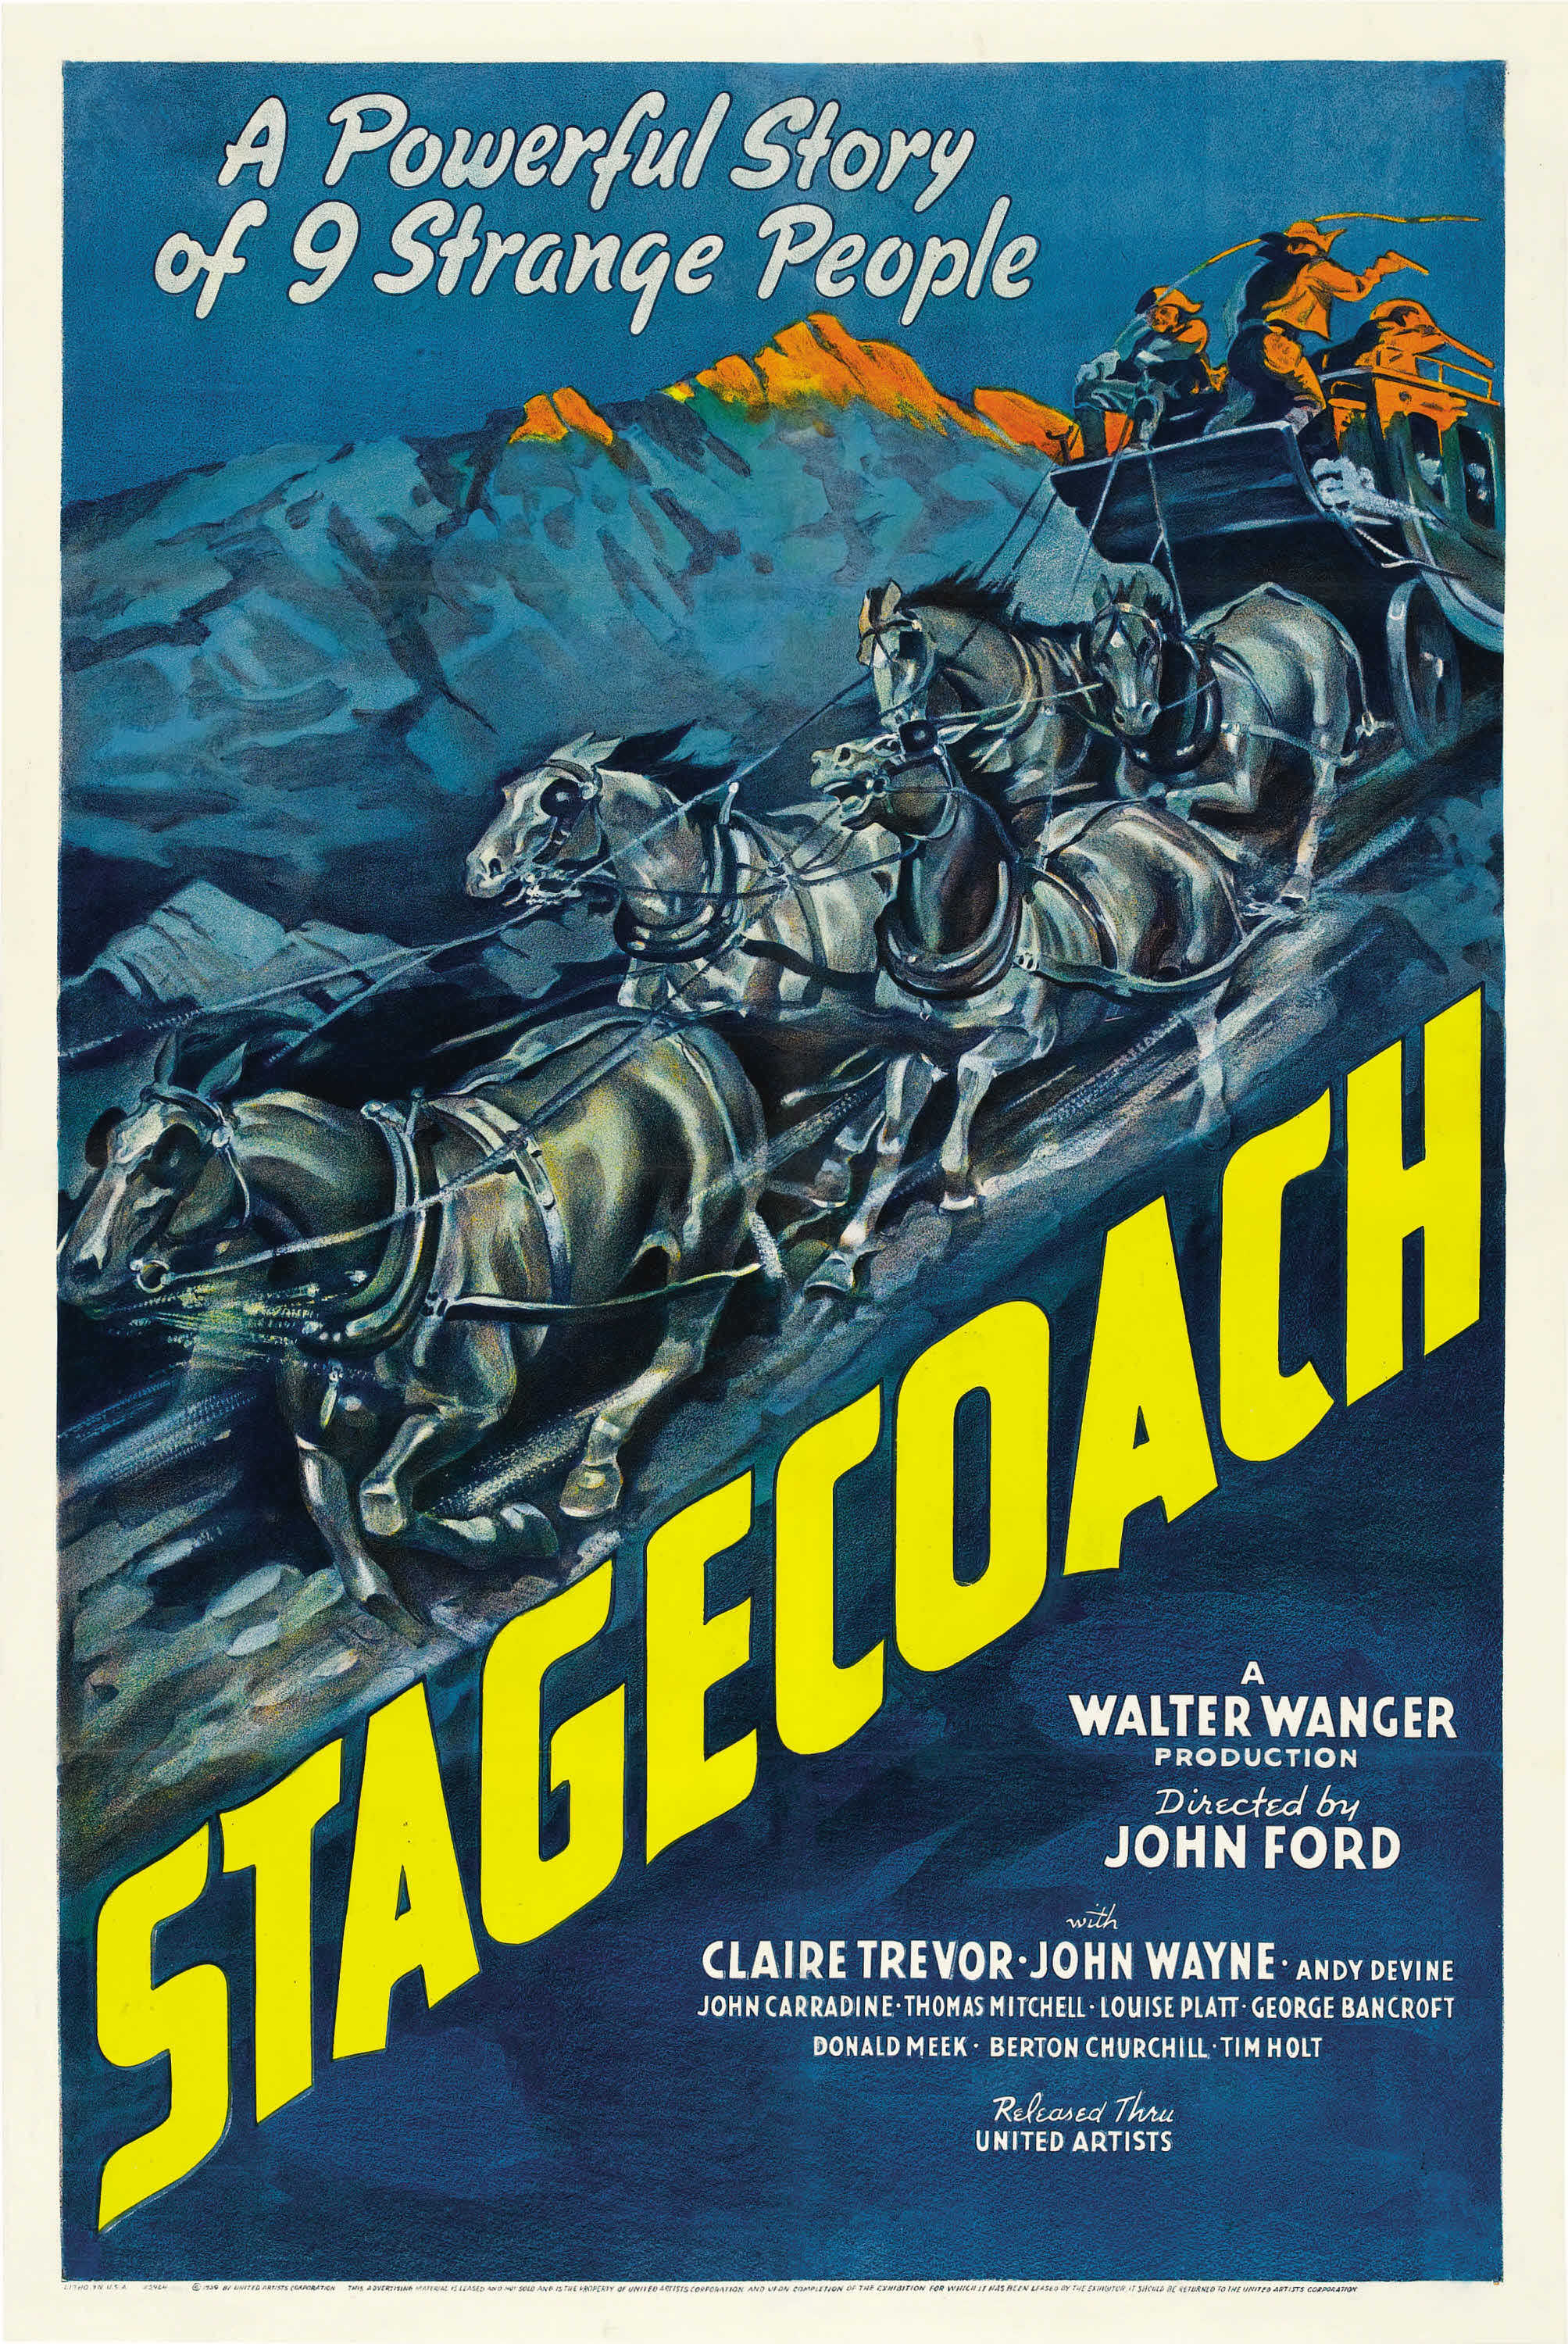 Movie poster for Stagecoach